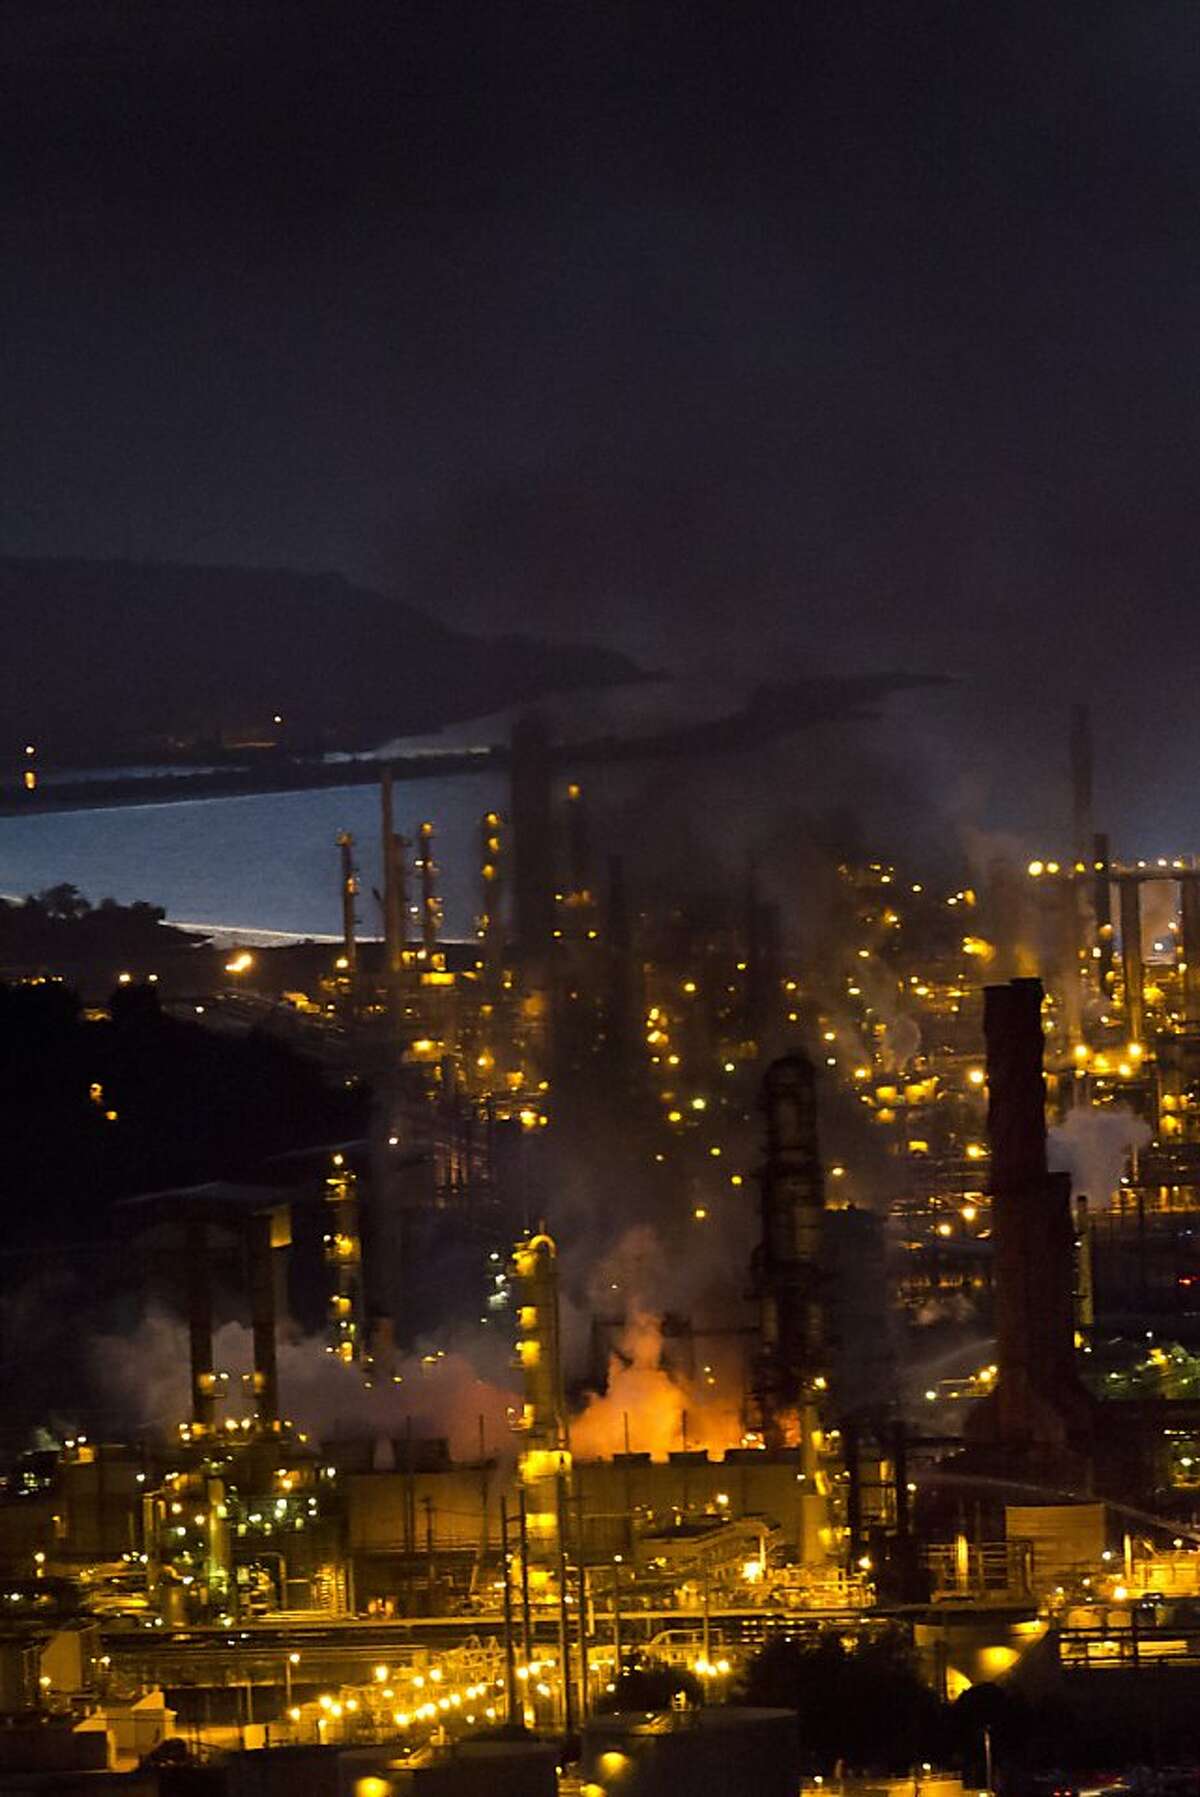 Smoke bellows from a fire at the Chevron refinery following an explosion at 6:30 on Monday, August 6, 2012 in Richmond, Calif.